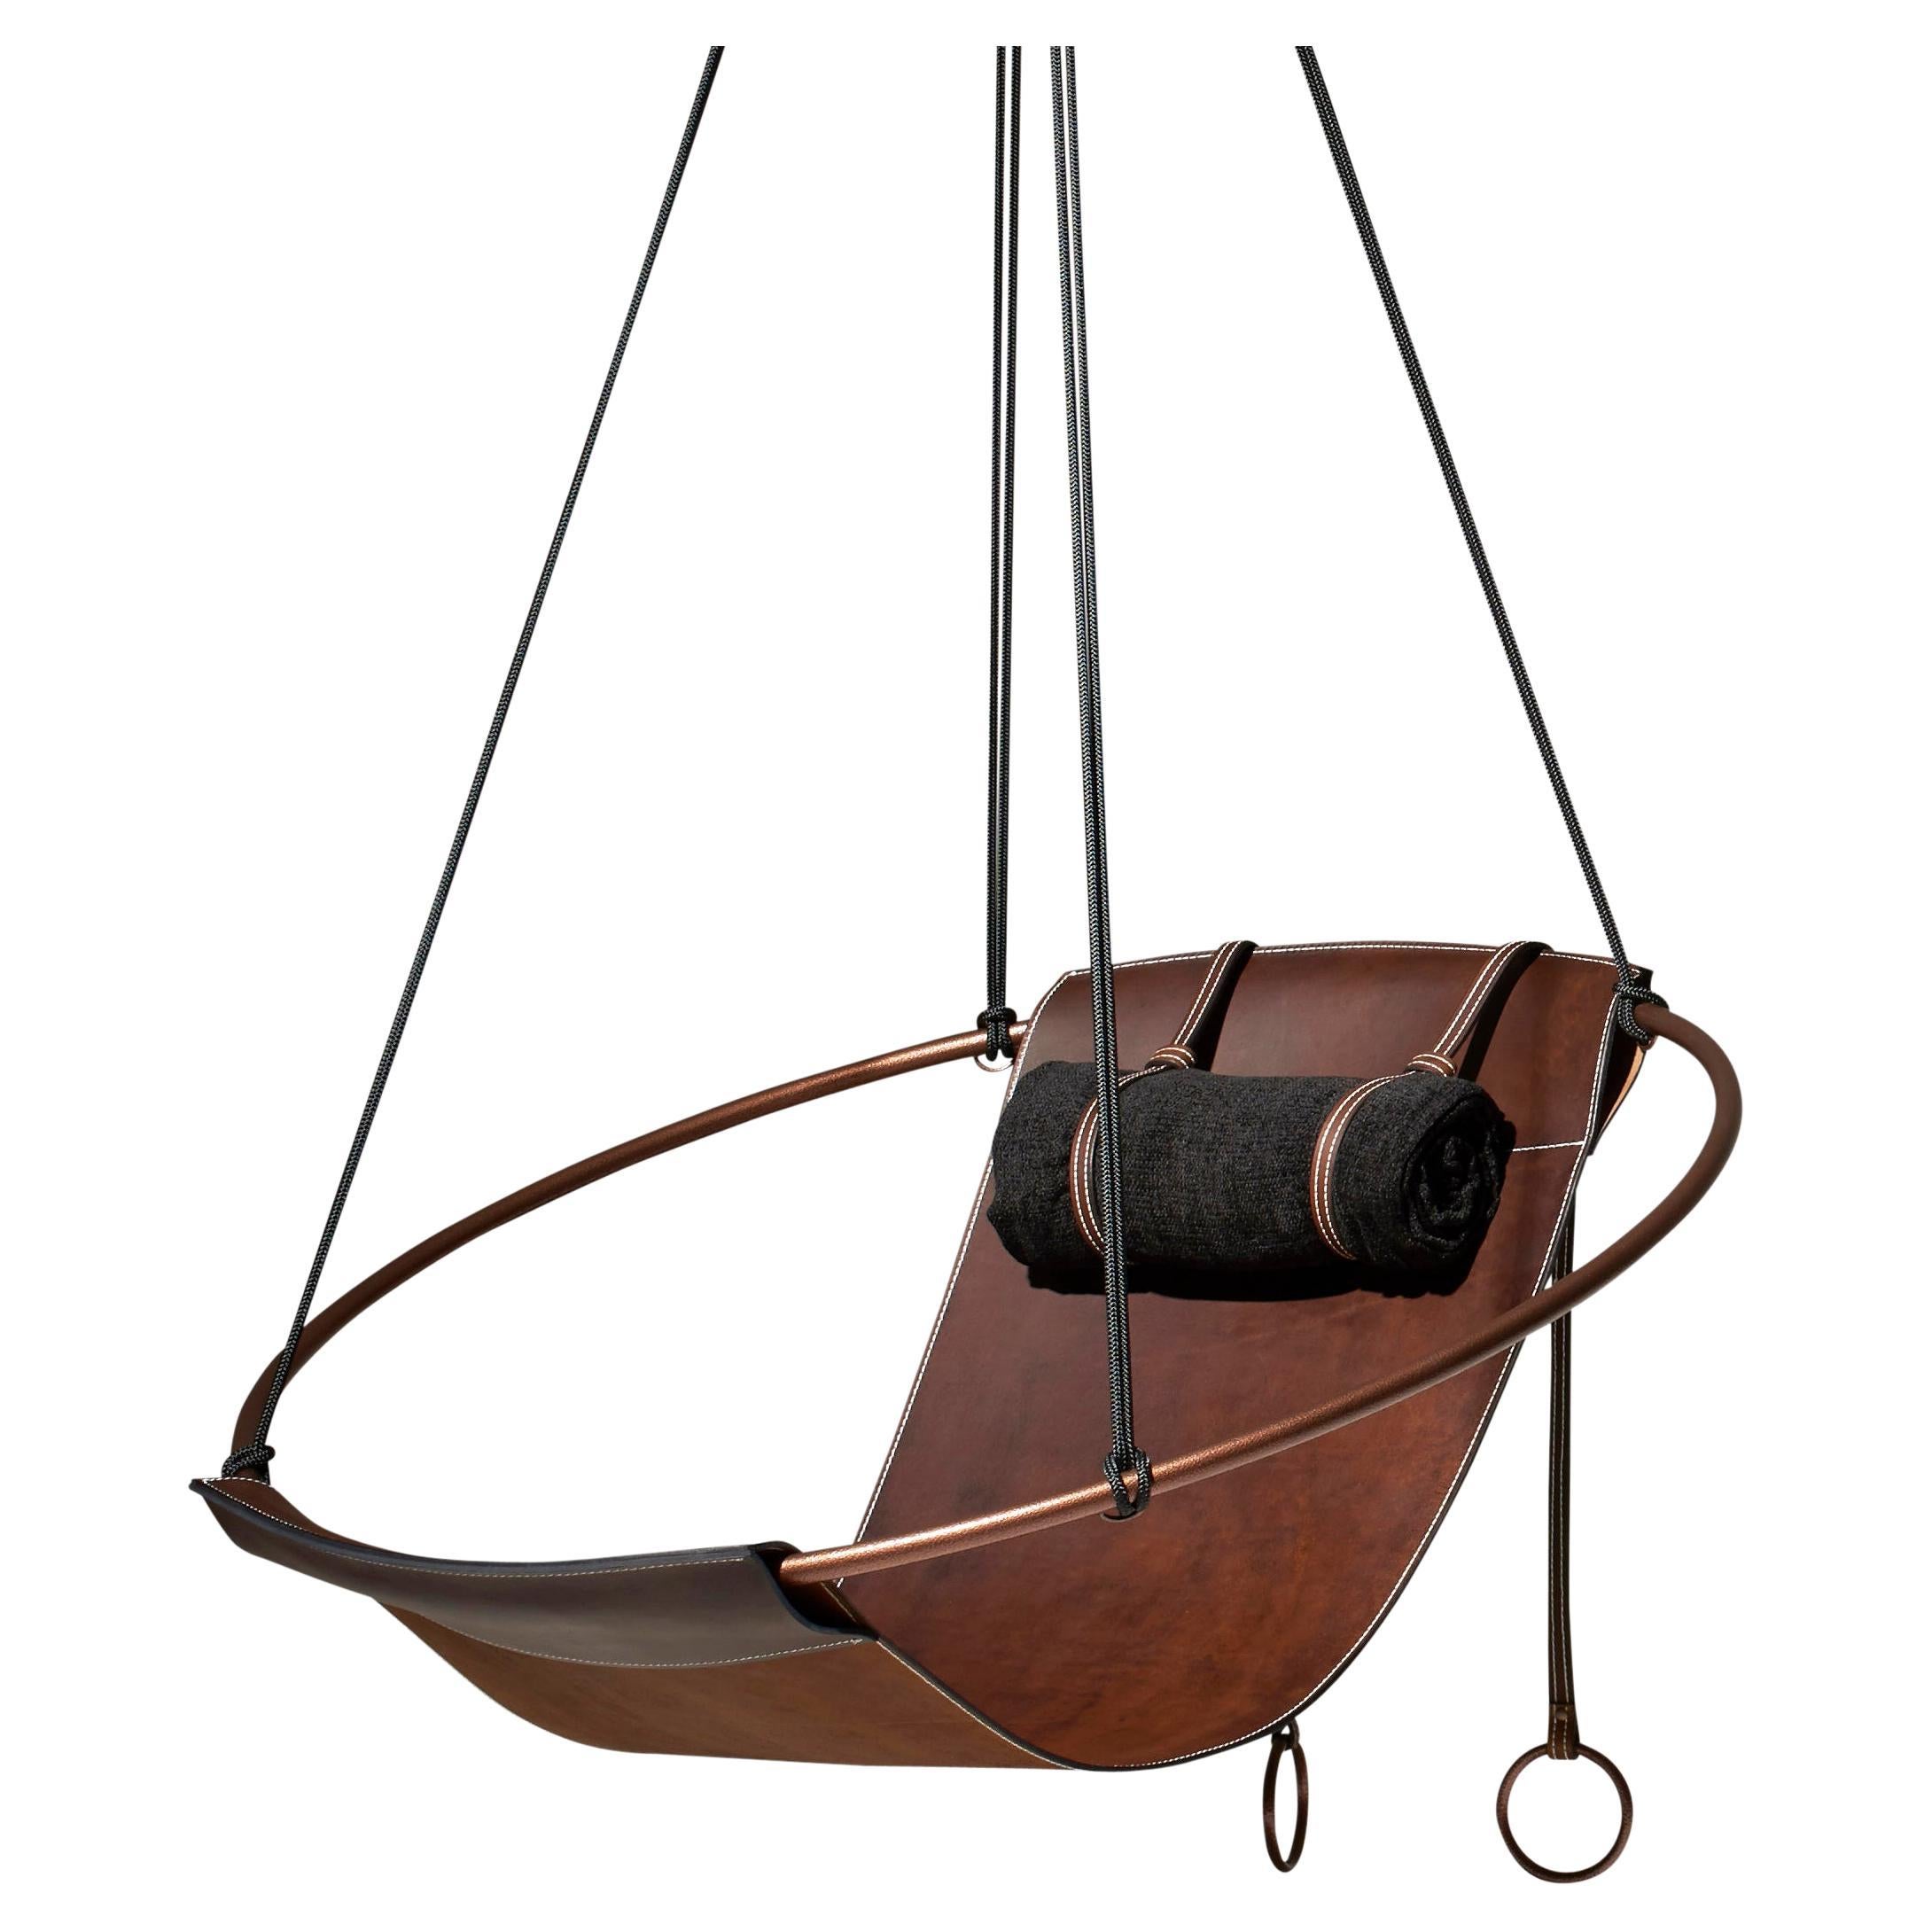 Modern, Rustic African Leather Hanging Sling Swing Chair